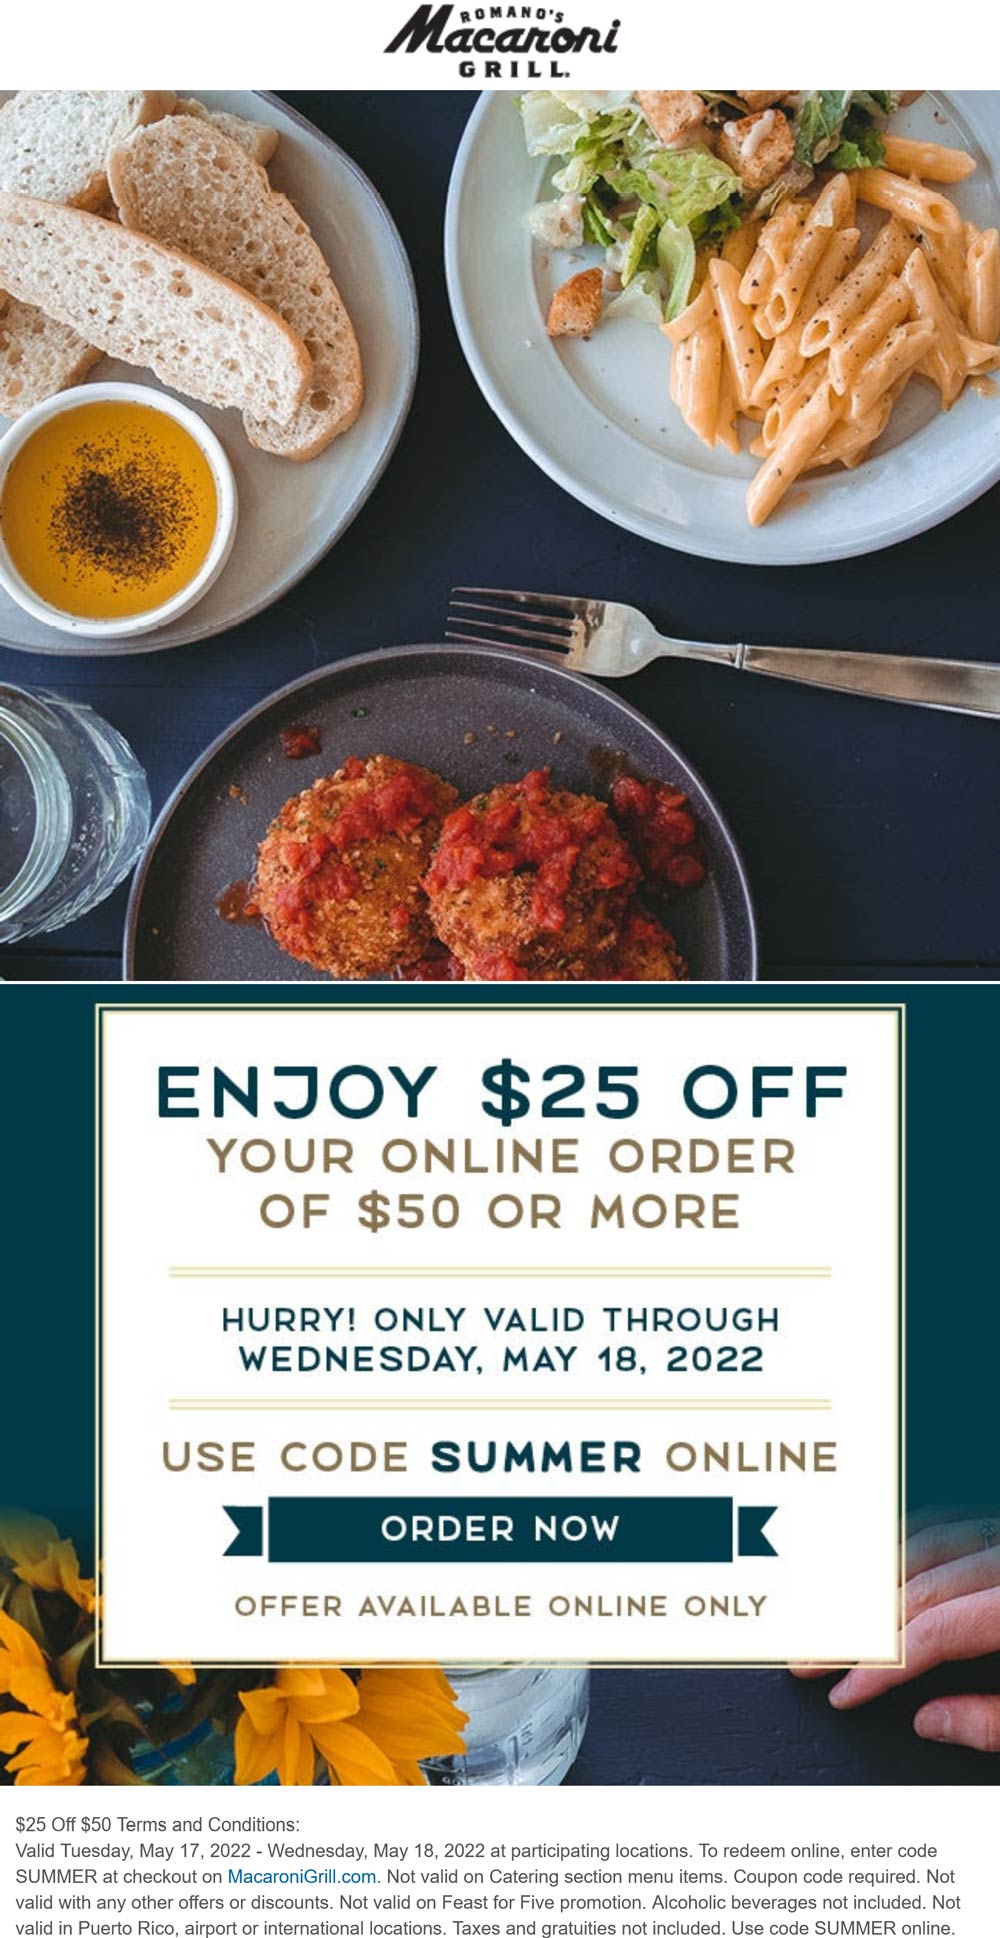 Macaroni Grill restaurants Coupon  $25 off $50 at Macaroni Grill restaurants via promo code SUMMER #macaronigrill 